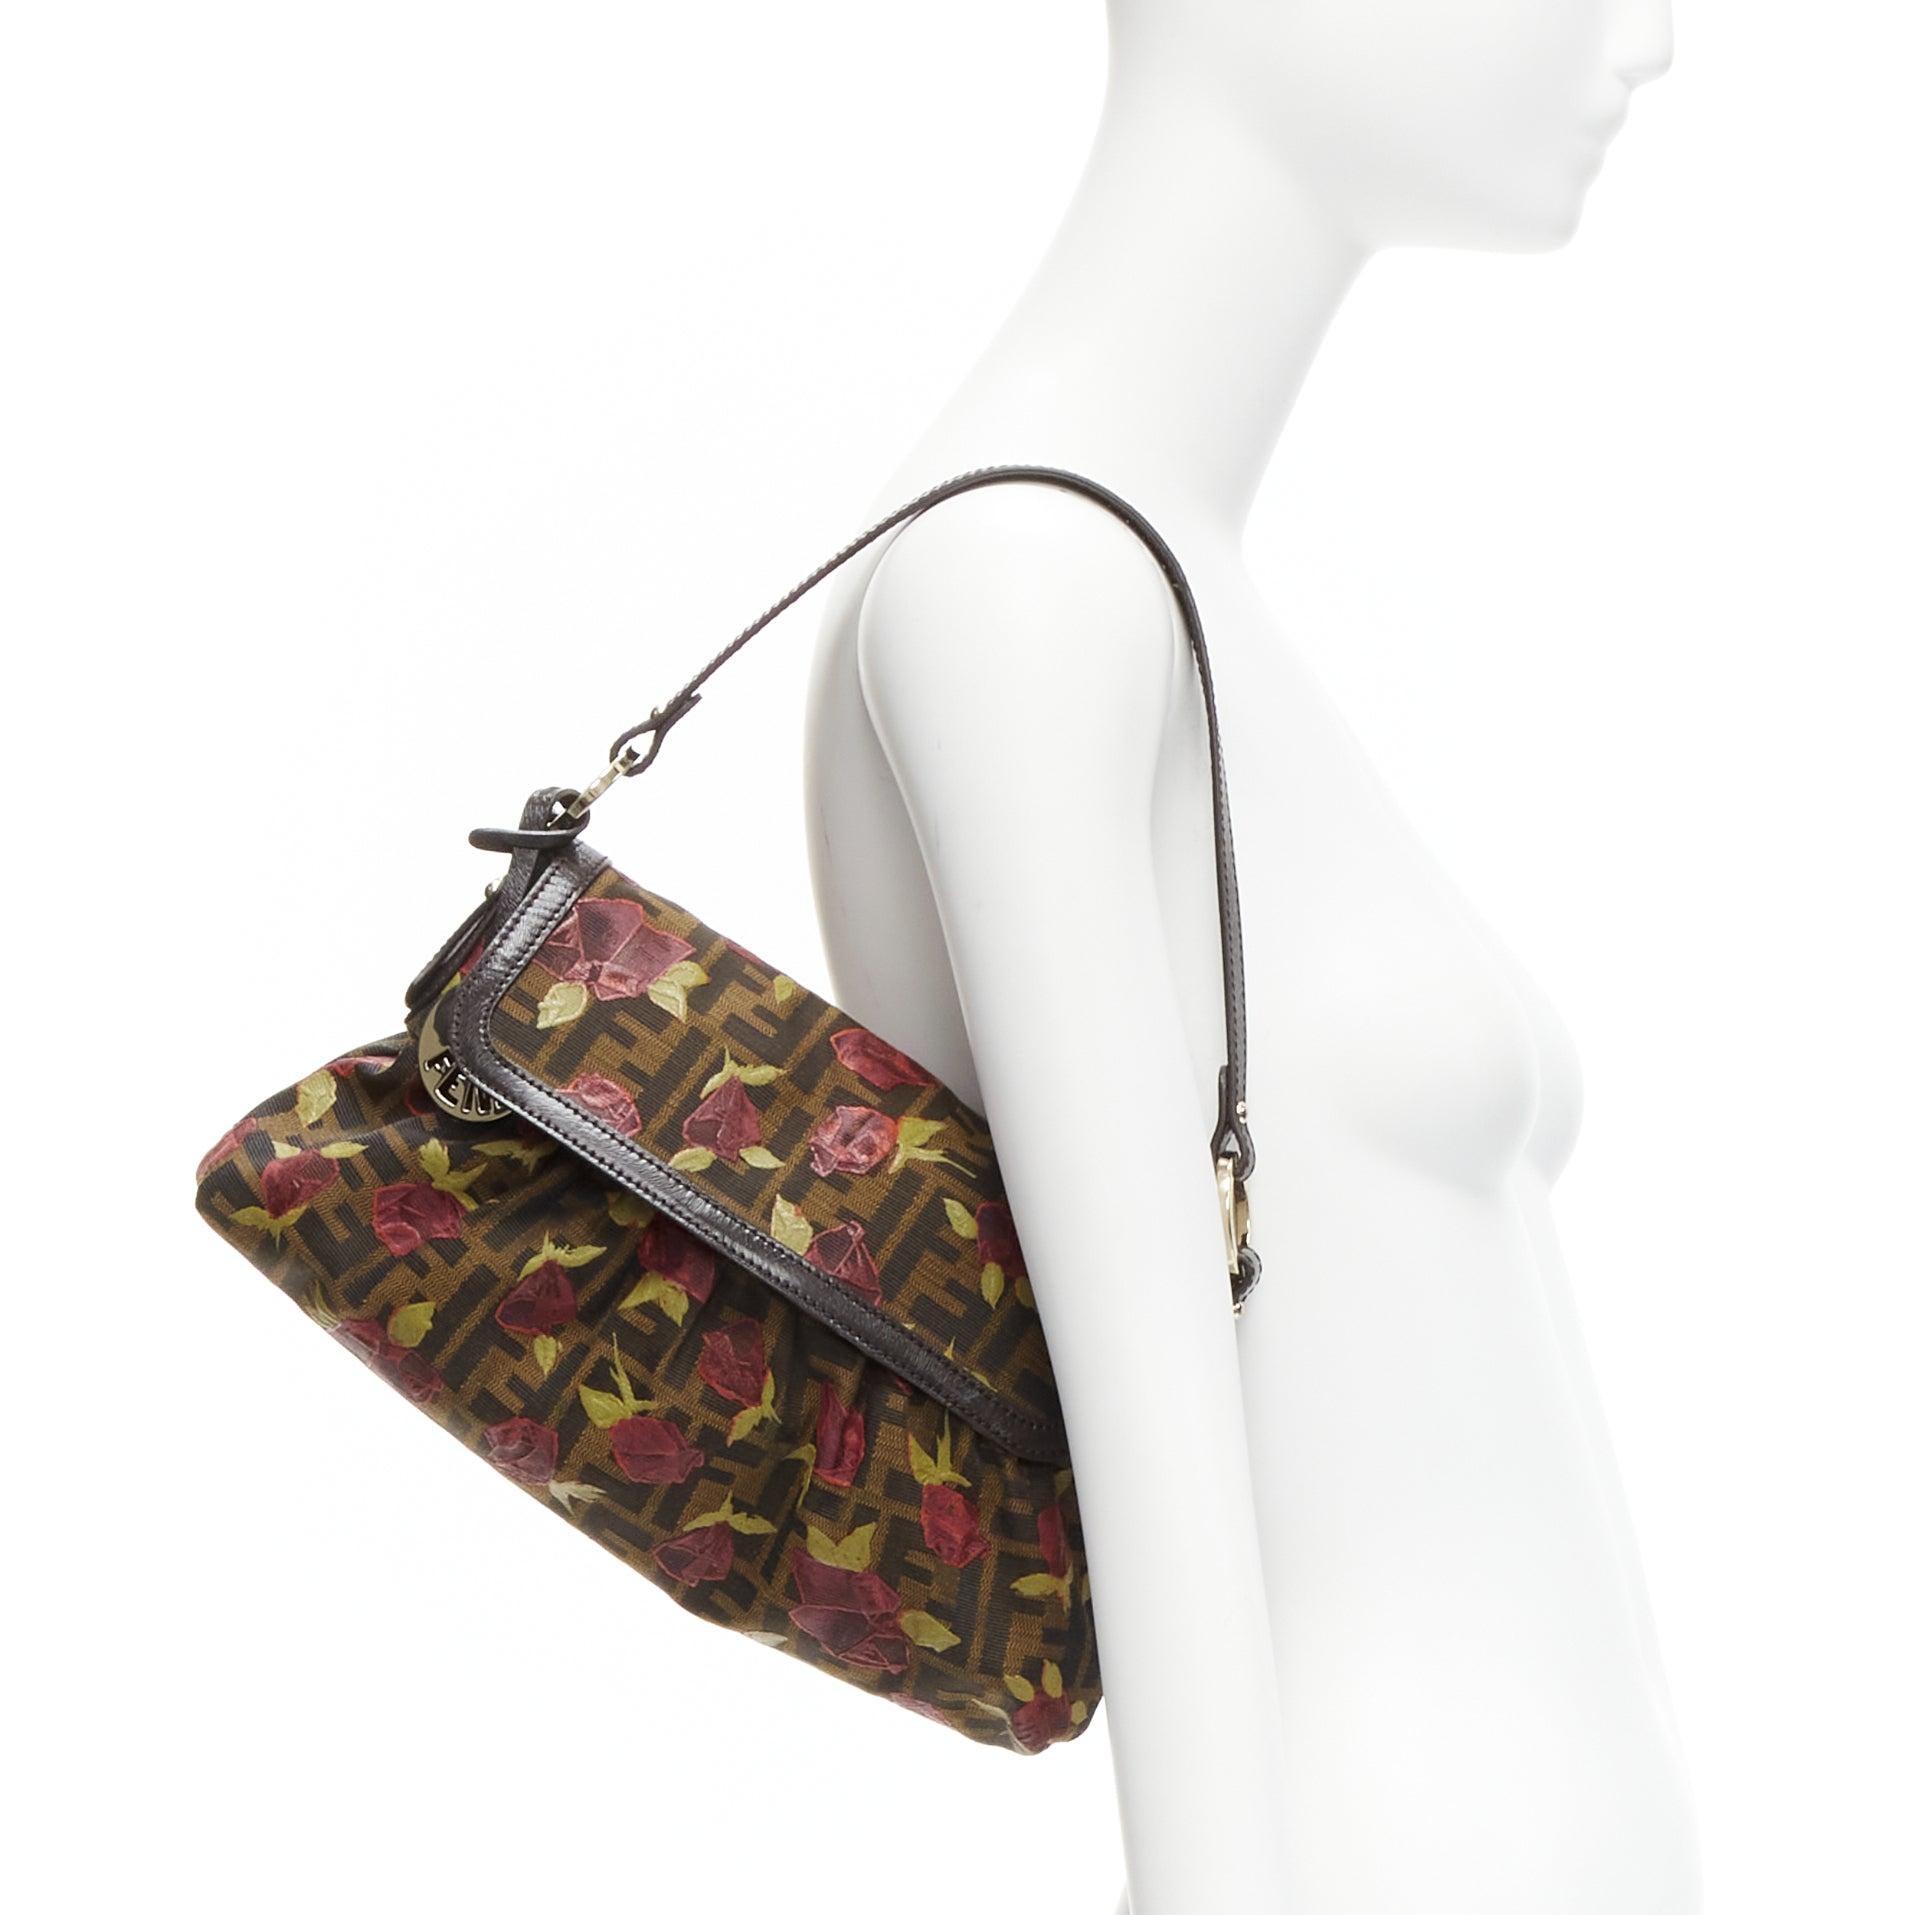 FENDI Chef red rose print brown FF Zucca canvas leather shoulder bag
Reference: TGAS/D00777
Brand: Fendi
Model: Chef
Material: Fabric, Leather
Color: Brown, Red
Pattern: Monogram
Closure: Snap Buttons
Lining: Brown Fabric
Extra Details: Brown